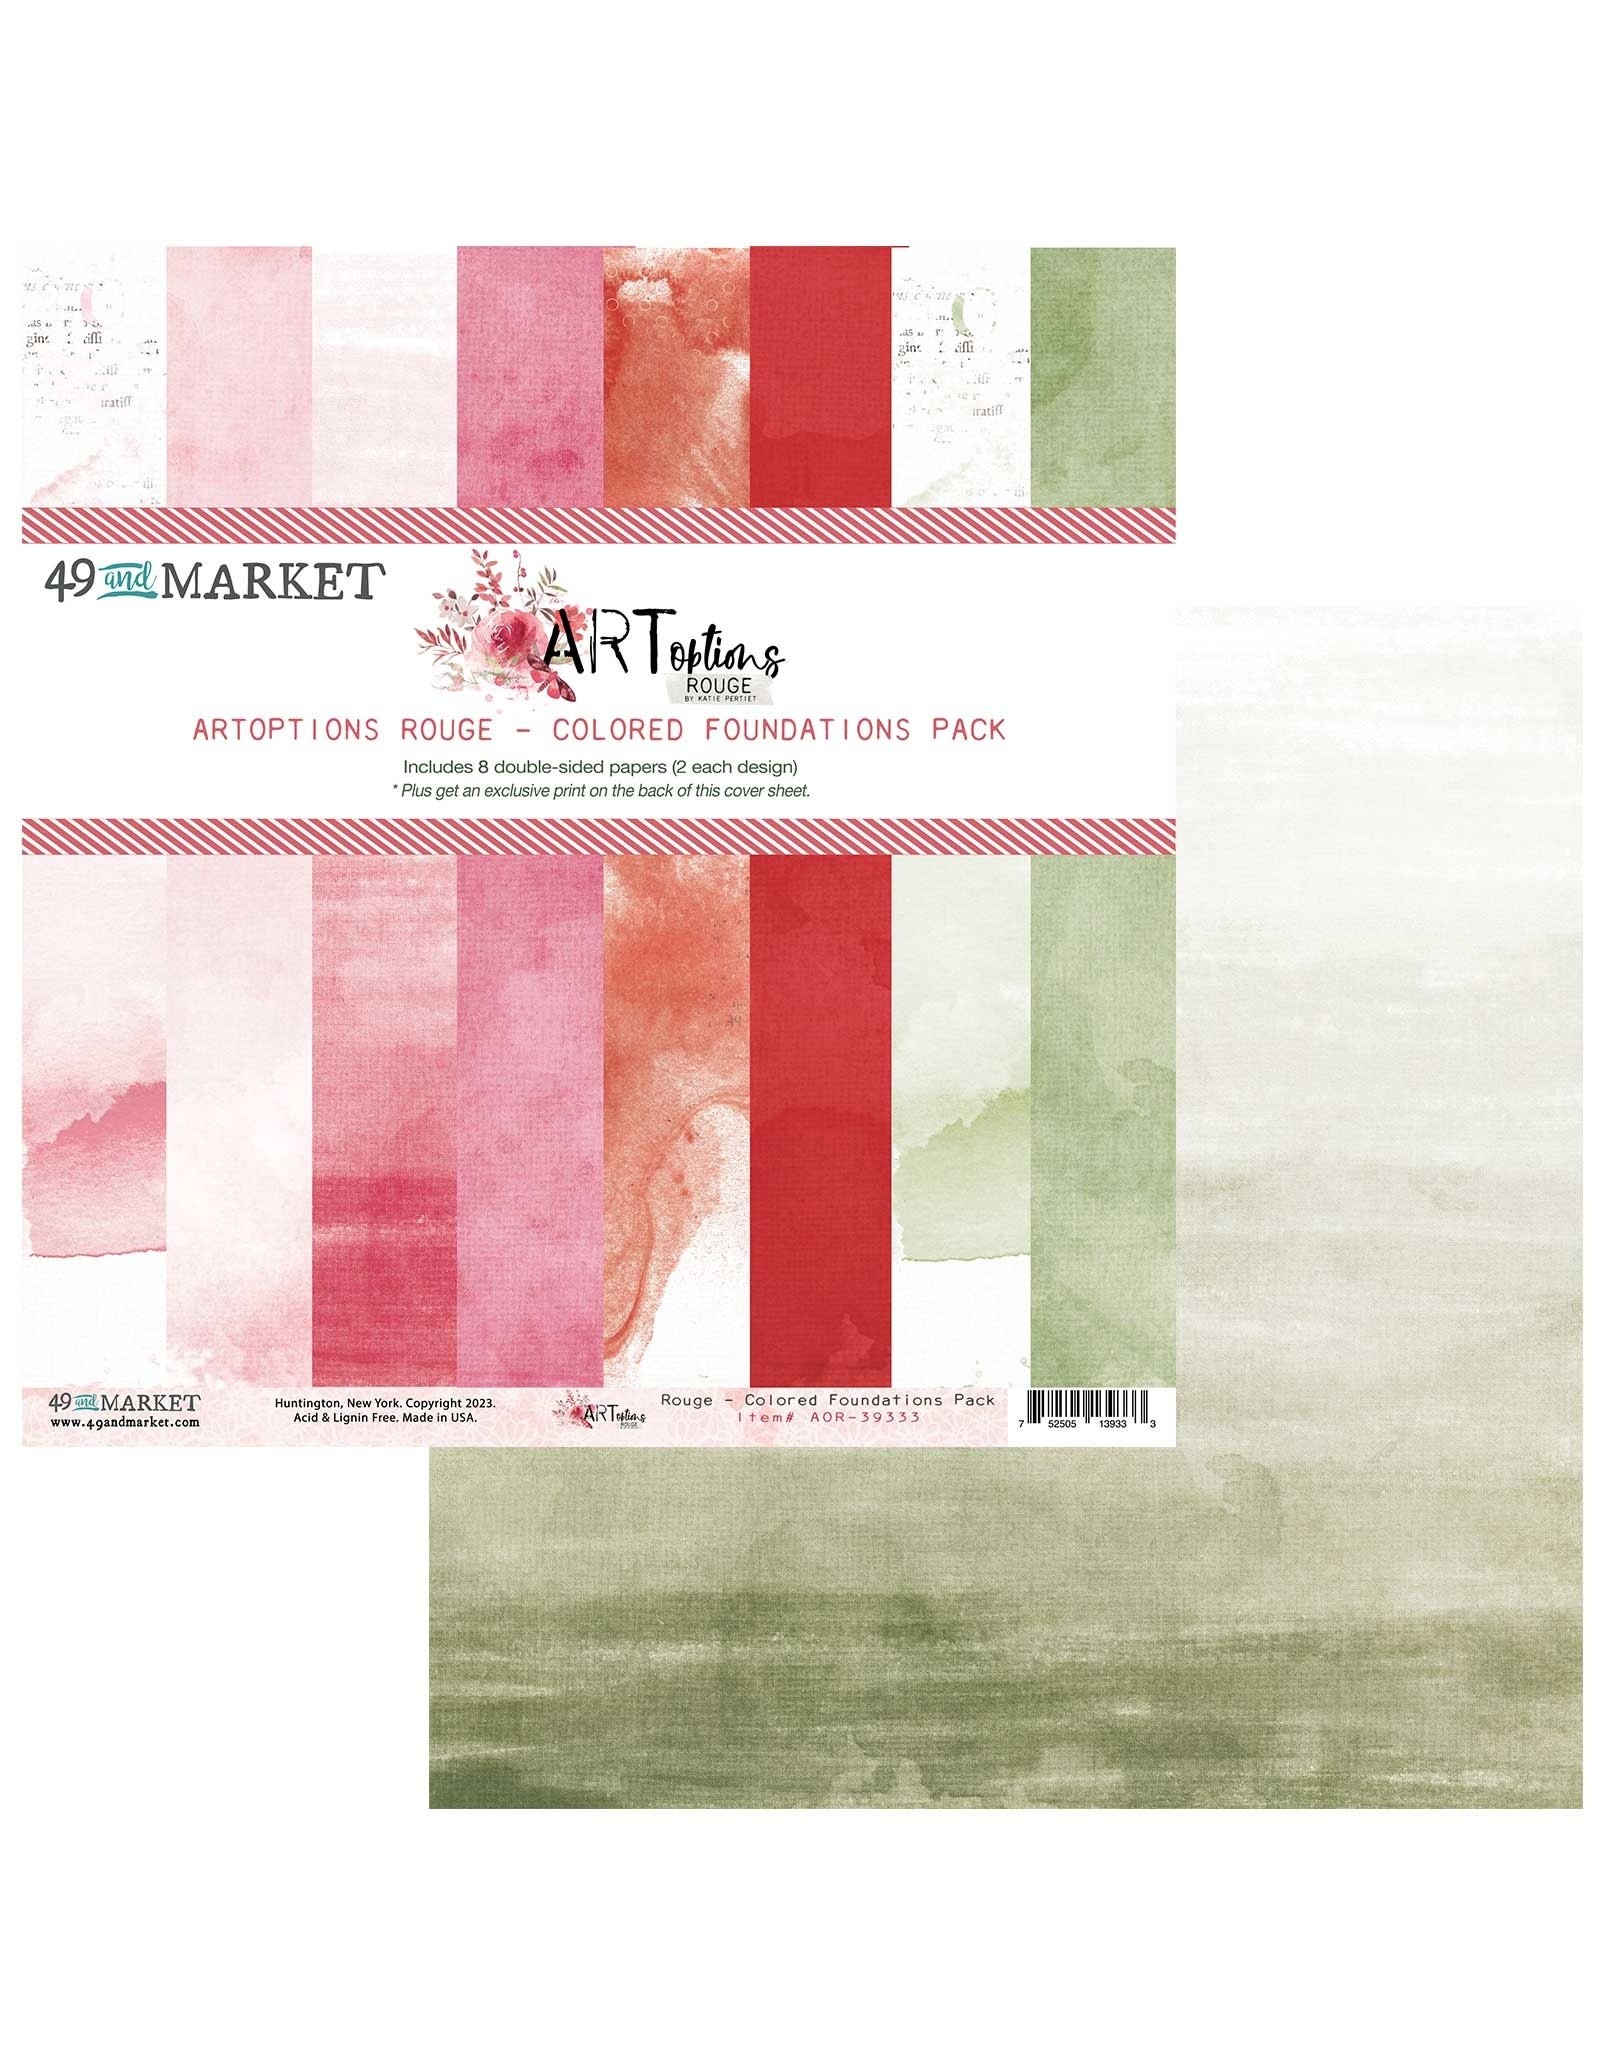 49 AND MARKET ART ROUGE FOUNDATION 12X12 PACK